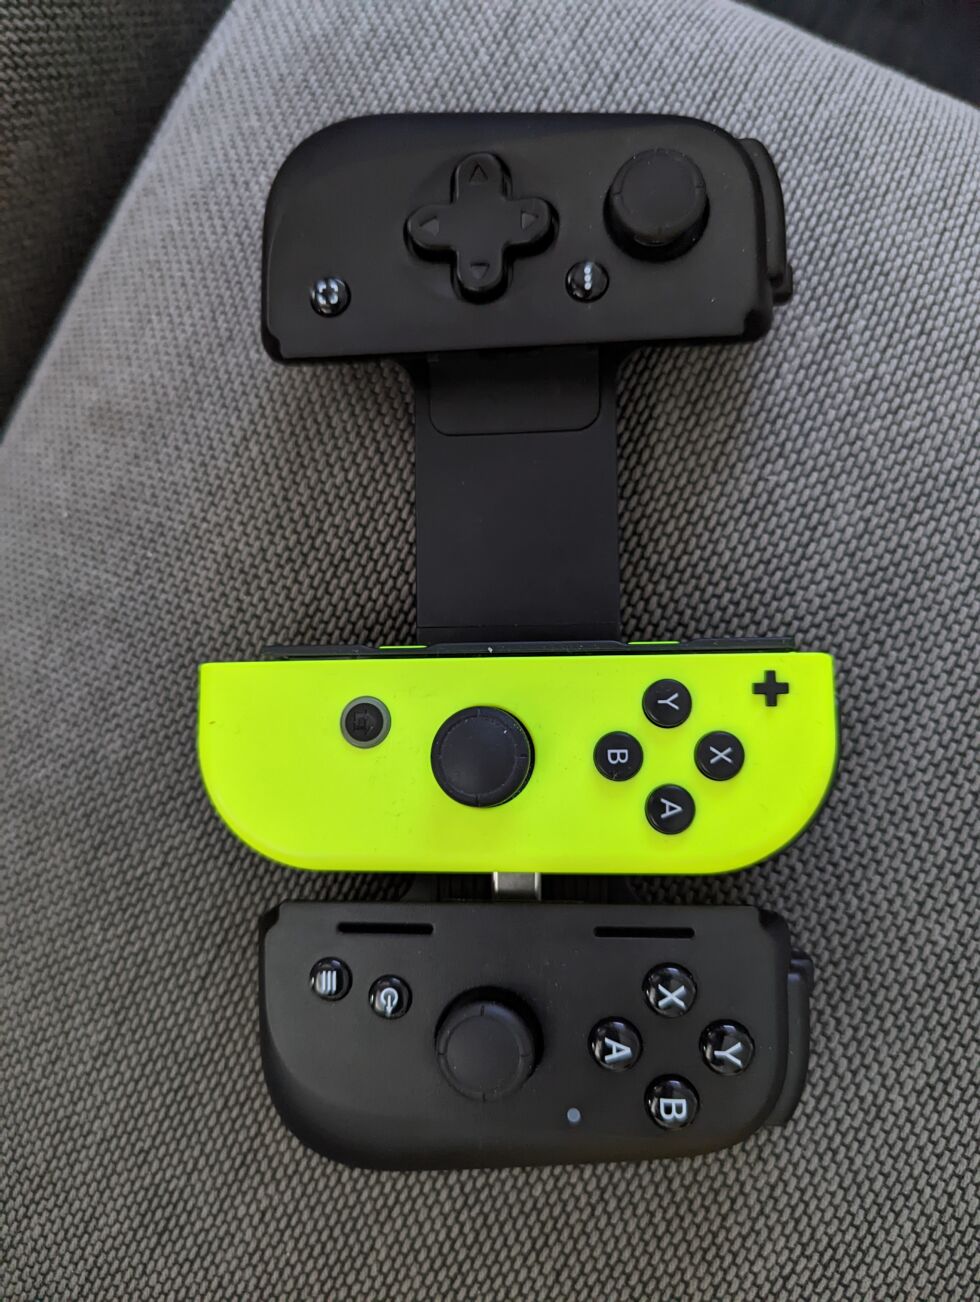 A photo to clarify my point about distance between the ABXY array and the joystick; Kishi V2 as compared to a Switch Joy-Con.